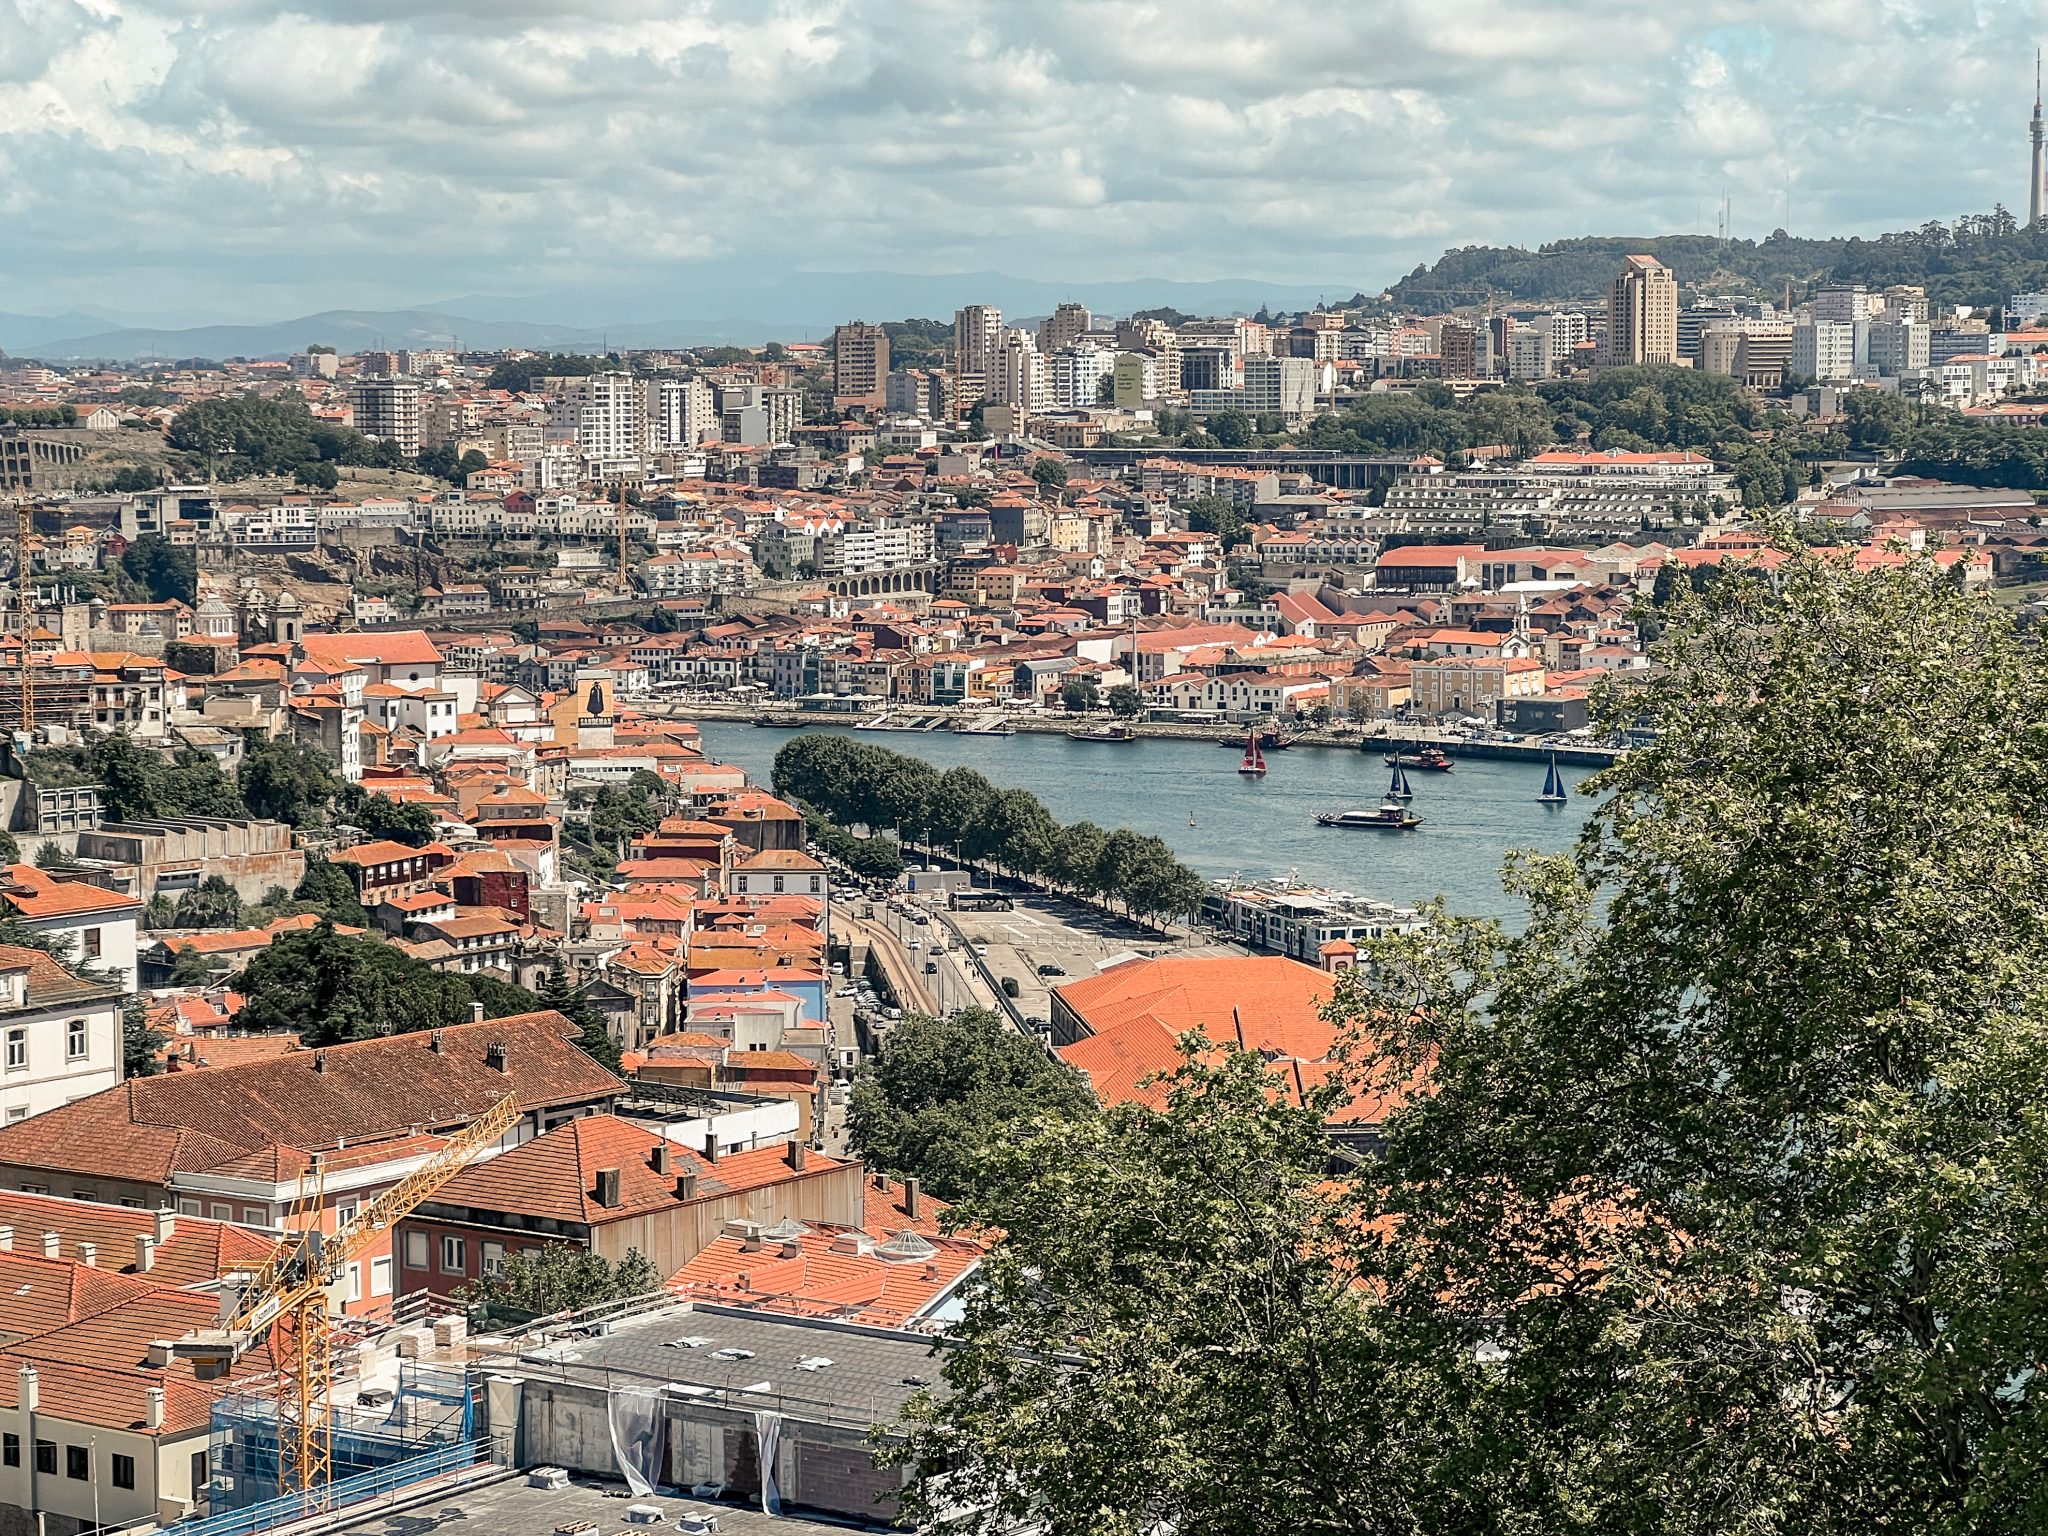 Buildings lining the sides of the Douro River in Porto, Portugal